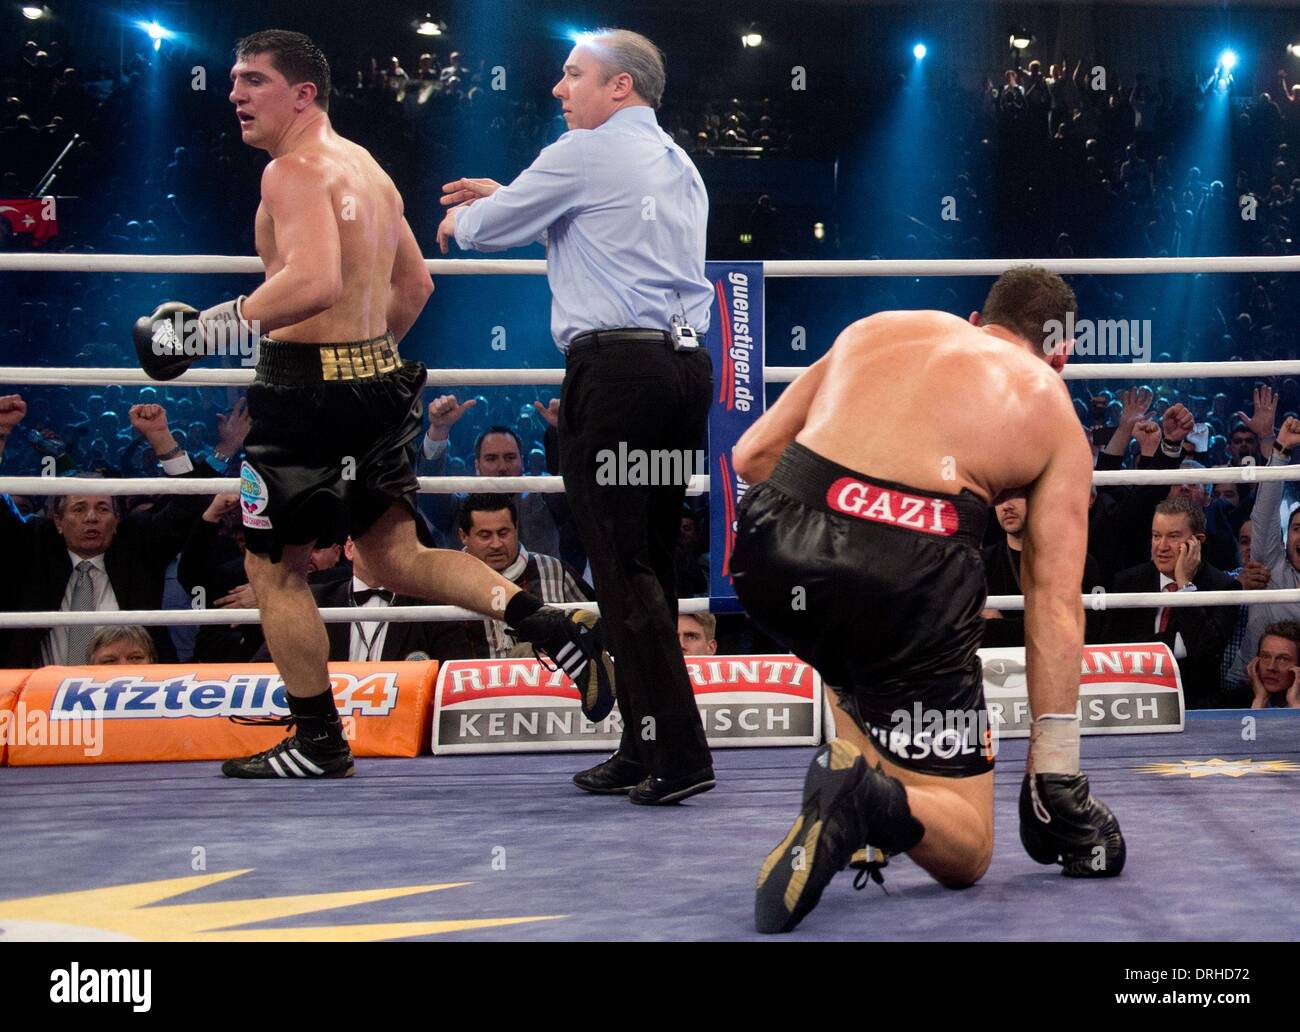 Stuttgart, Germany. 26th Jan, 2014. German WBO champion Marco Huck (L) in action against Firat Arslan who kneels on the floor (R) during their World boxing Organization (WBO) Cruiserweight Championship match at Schleyer Hall in Stuttgart, Germany, 26 January 2014. Huck won against challenger Firat Arslan by technical k.o. in the sixth round. Photo: SEBASTIAN KAHNERT/dpa/Alamy Live News Stock Photo